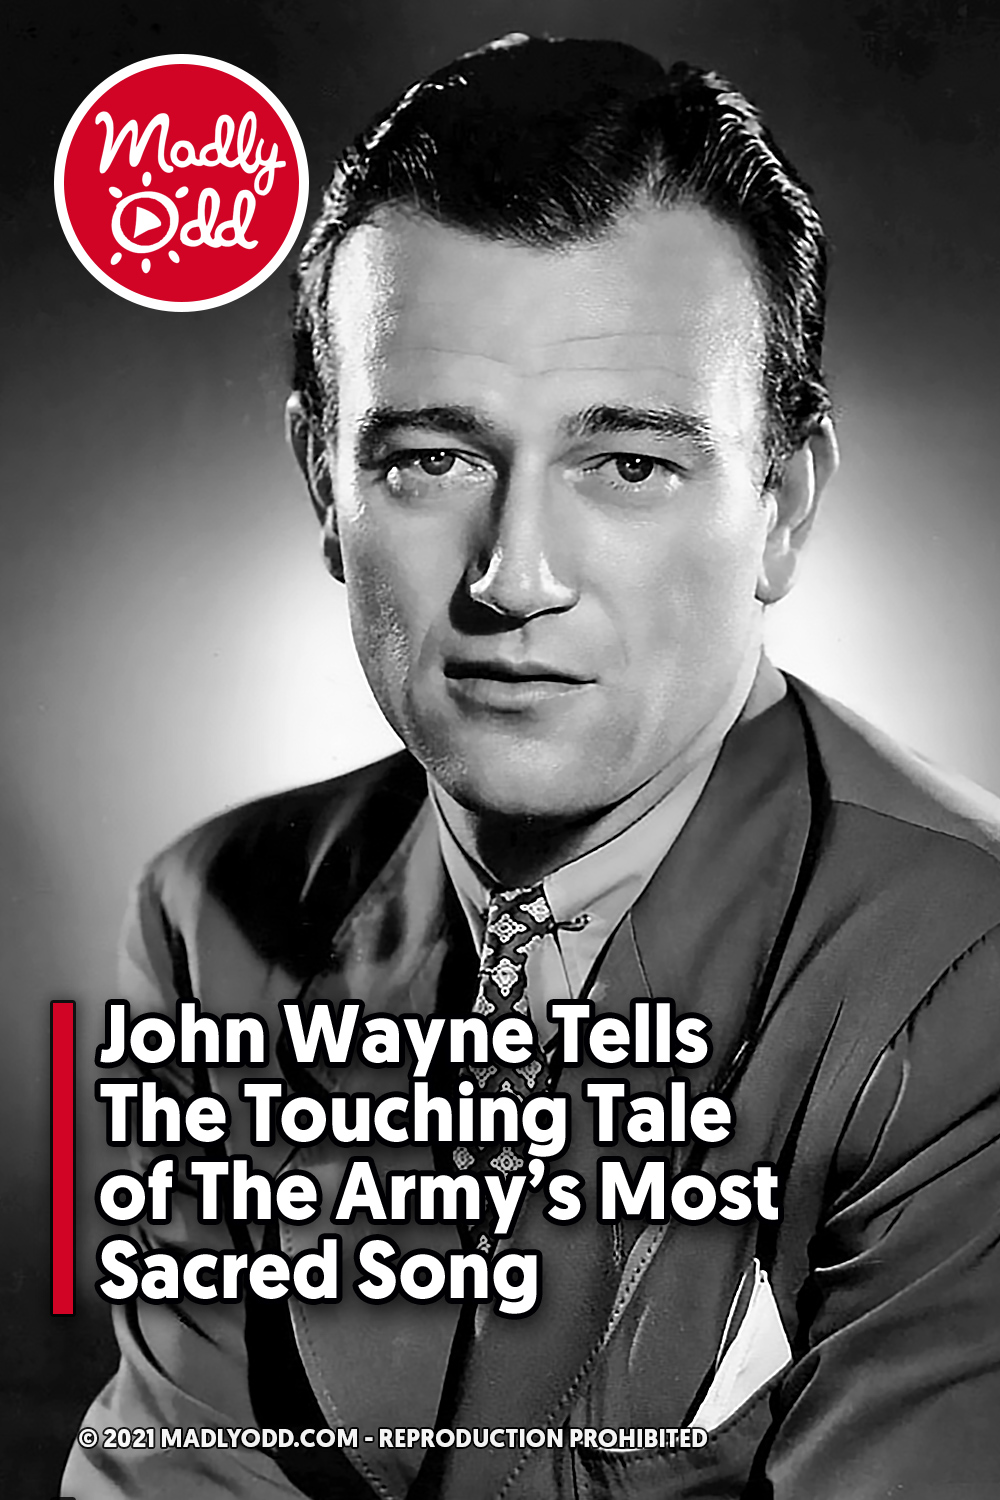 John Wayne Tells The Touching Tale of The Army\'s Most Sacred Song